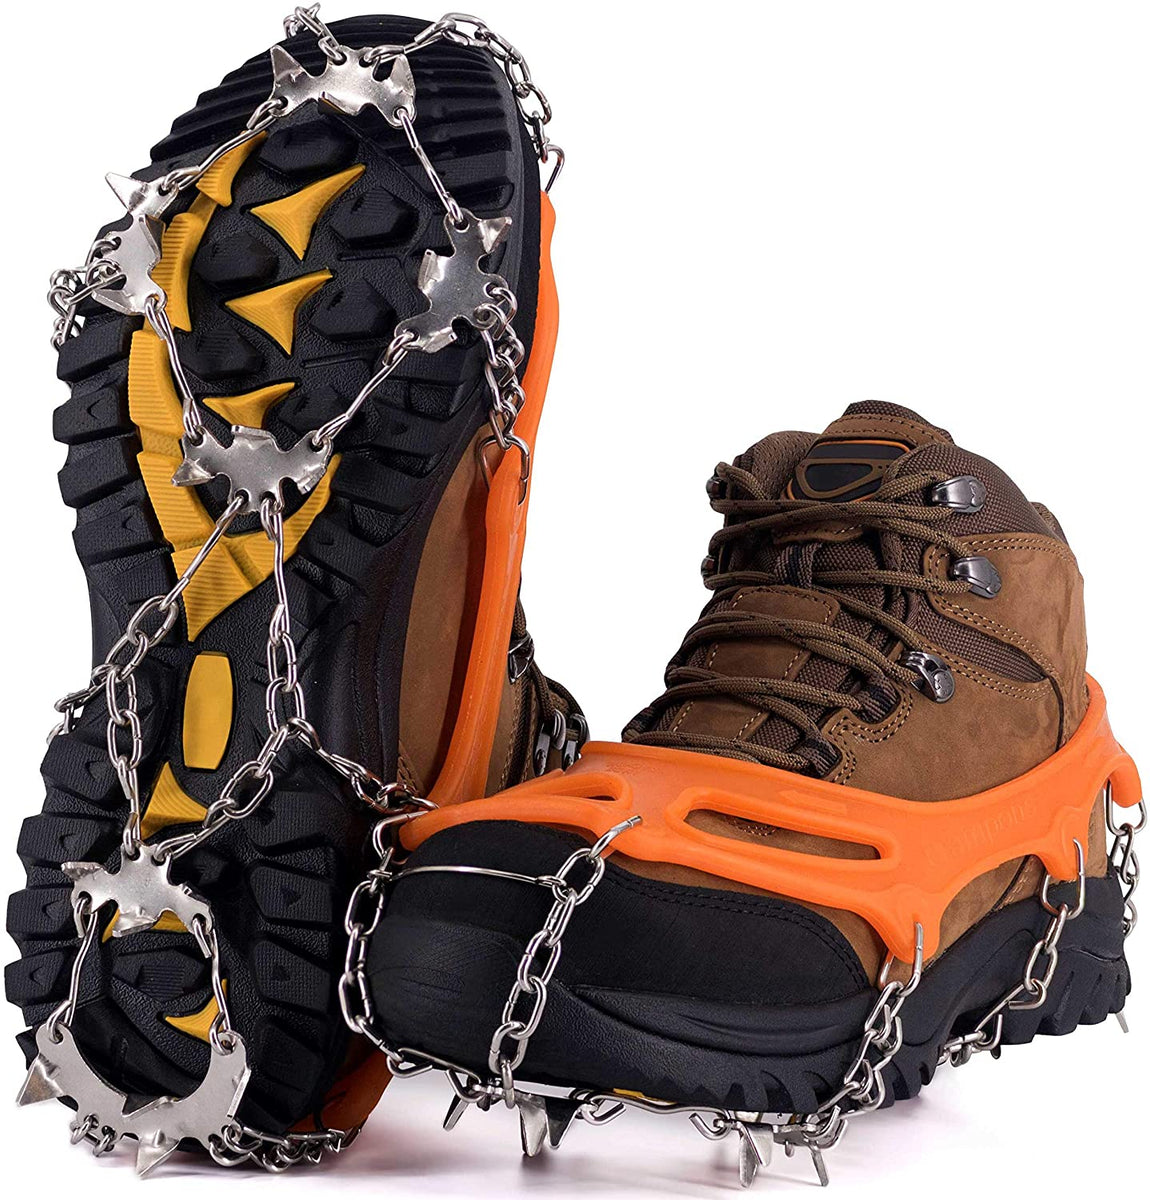 NewDoar Ice Cleats Crampons Traction,19 Spikes Stainless Steel